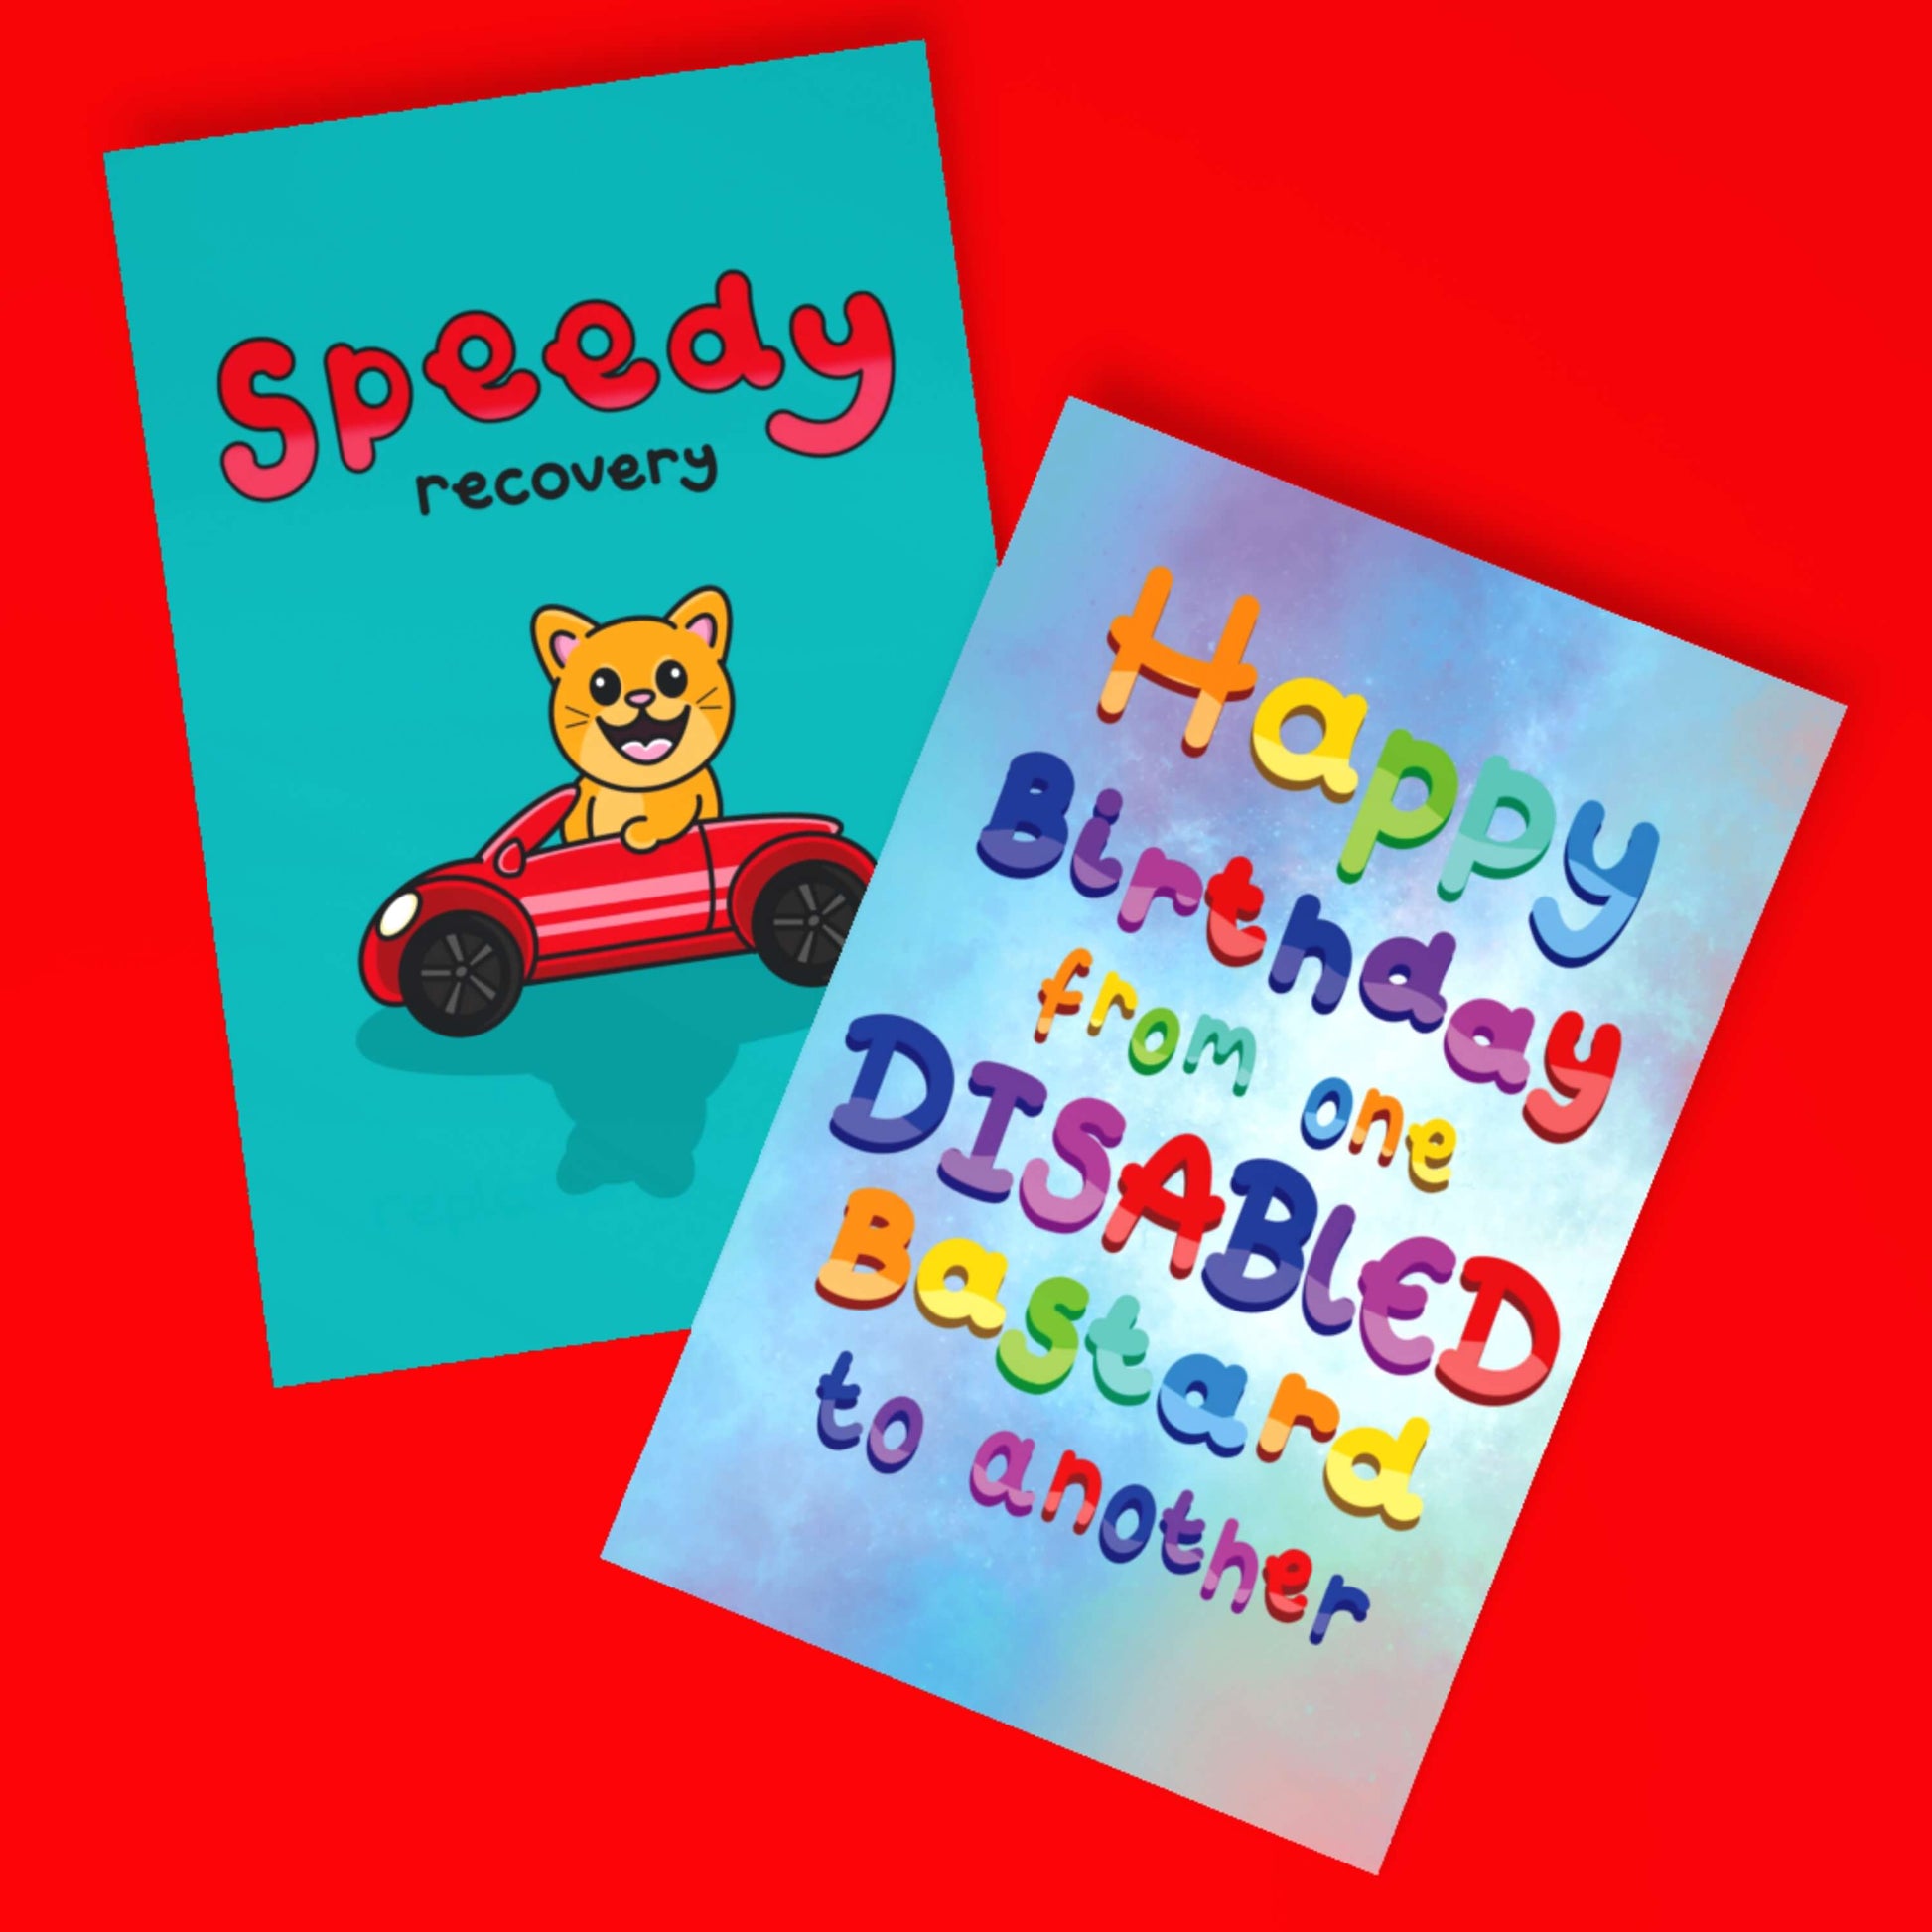 The Happy Birthday From One Disabled Bastard To Another Card on a red background with another innabox card underneath. The pastel blue and purple a6 birthday card has rainbow bubble writing reading 'happy birthday from one disabled bastard to another'. The hand drawn design is a humorous greeting card raising awareness for disabled people.